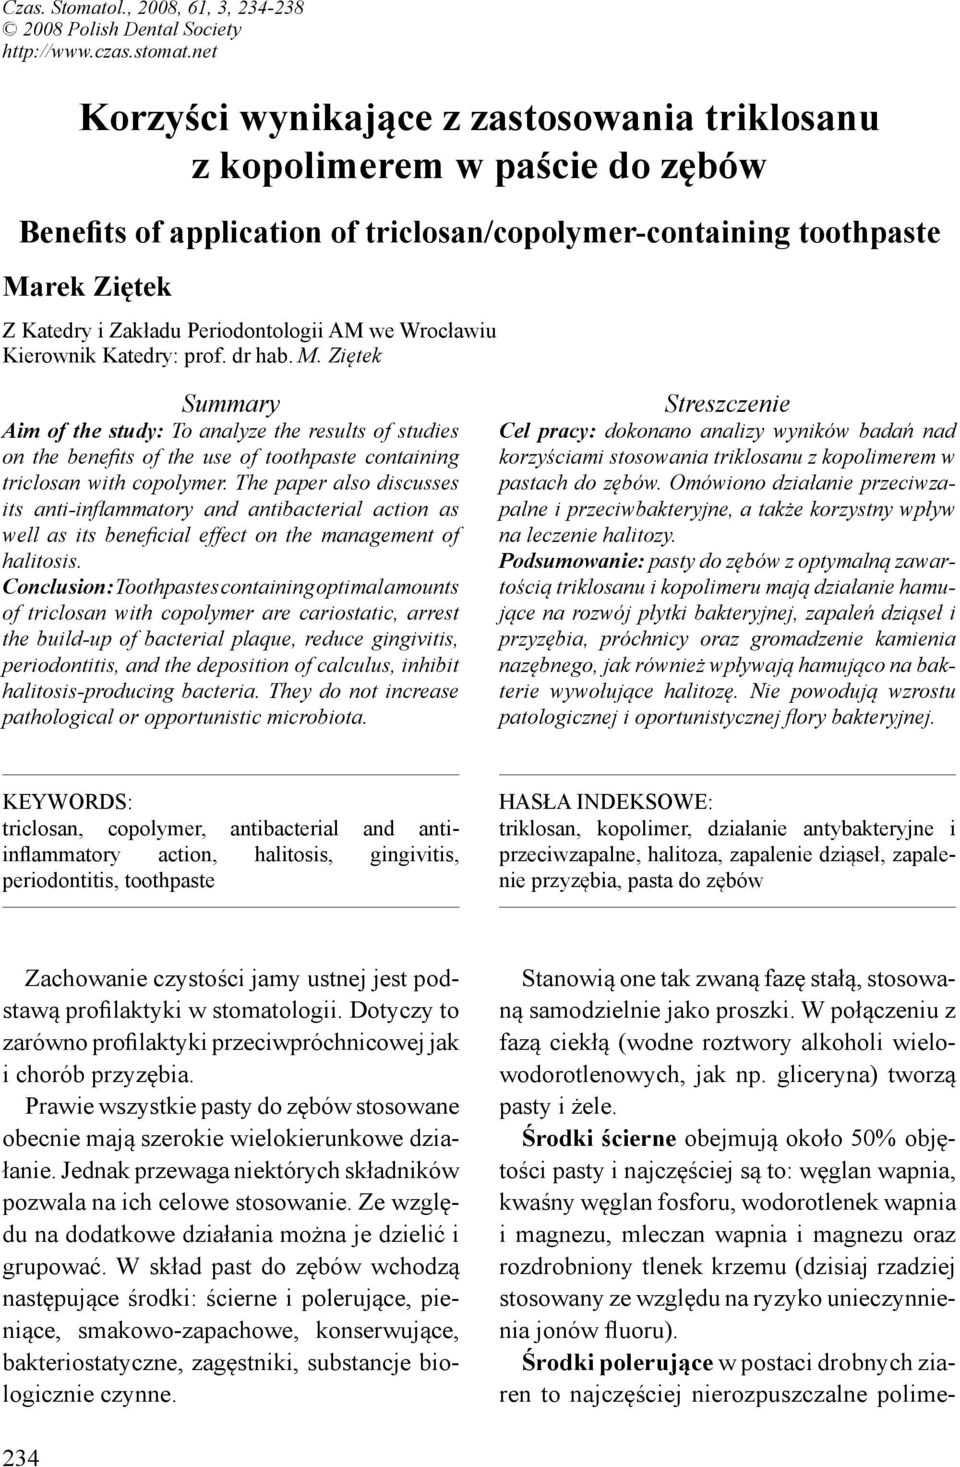 AM we Wrocławiu Kierownik Katedry: prof. dr hab. M. Ziętek Summary Aim of the study: To analyze the results of studies on the benefits of the use of toothpaste containing triclosan with copolymer.